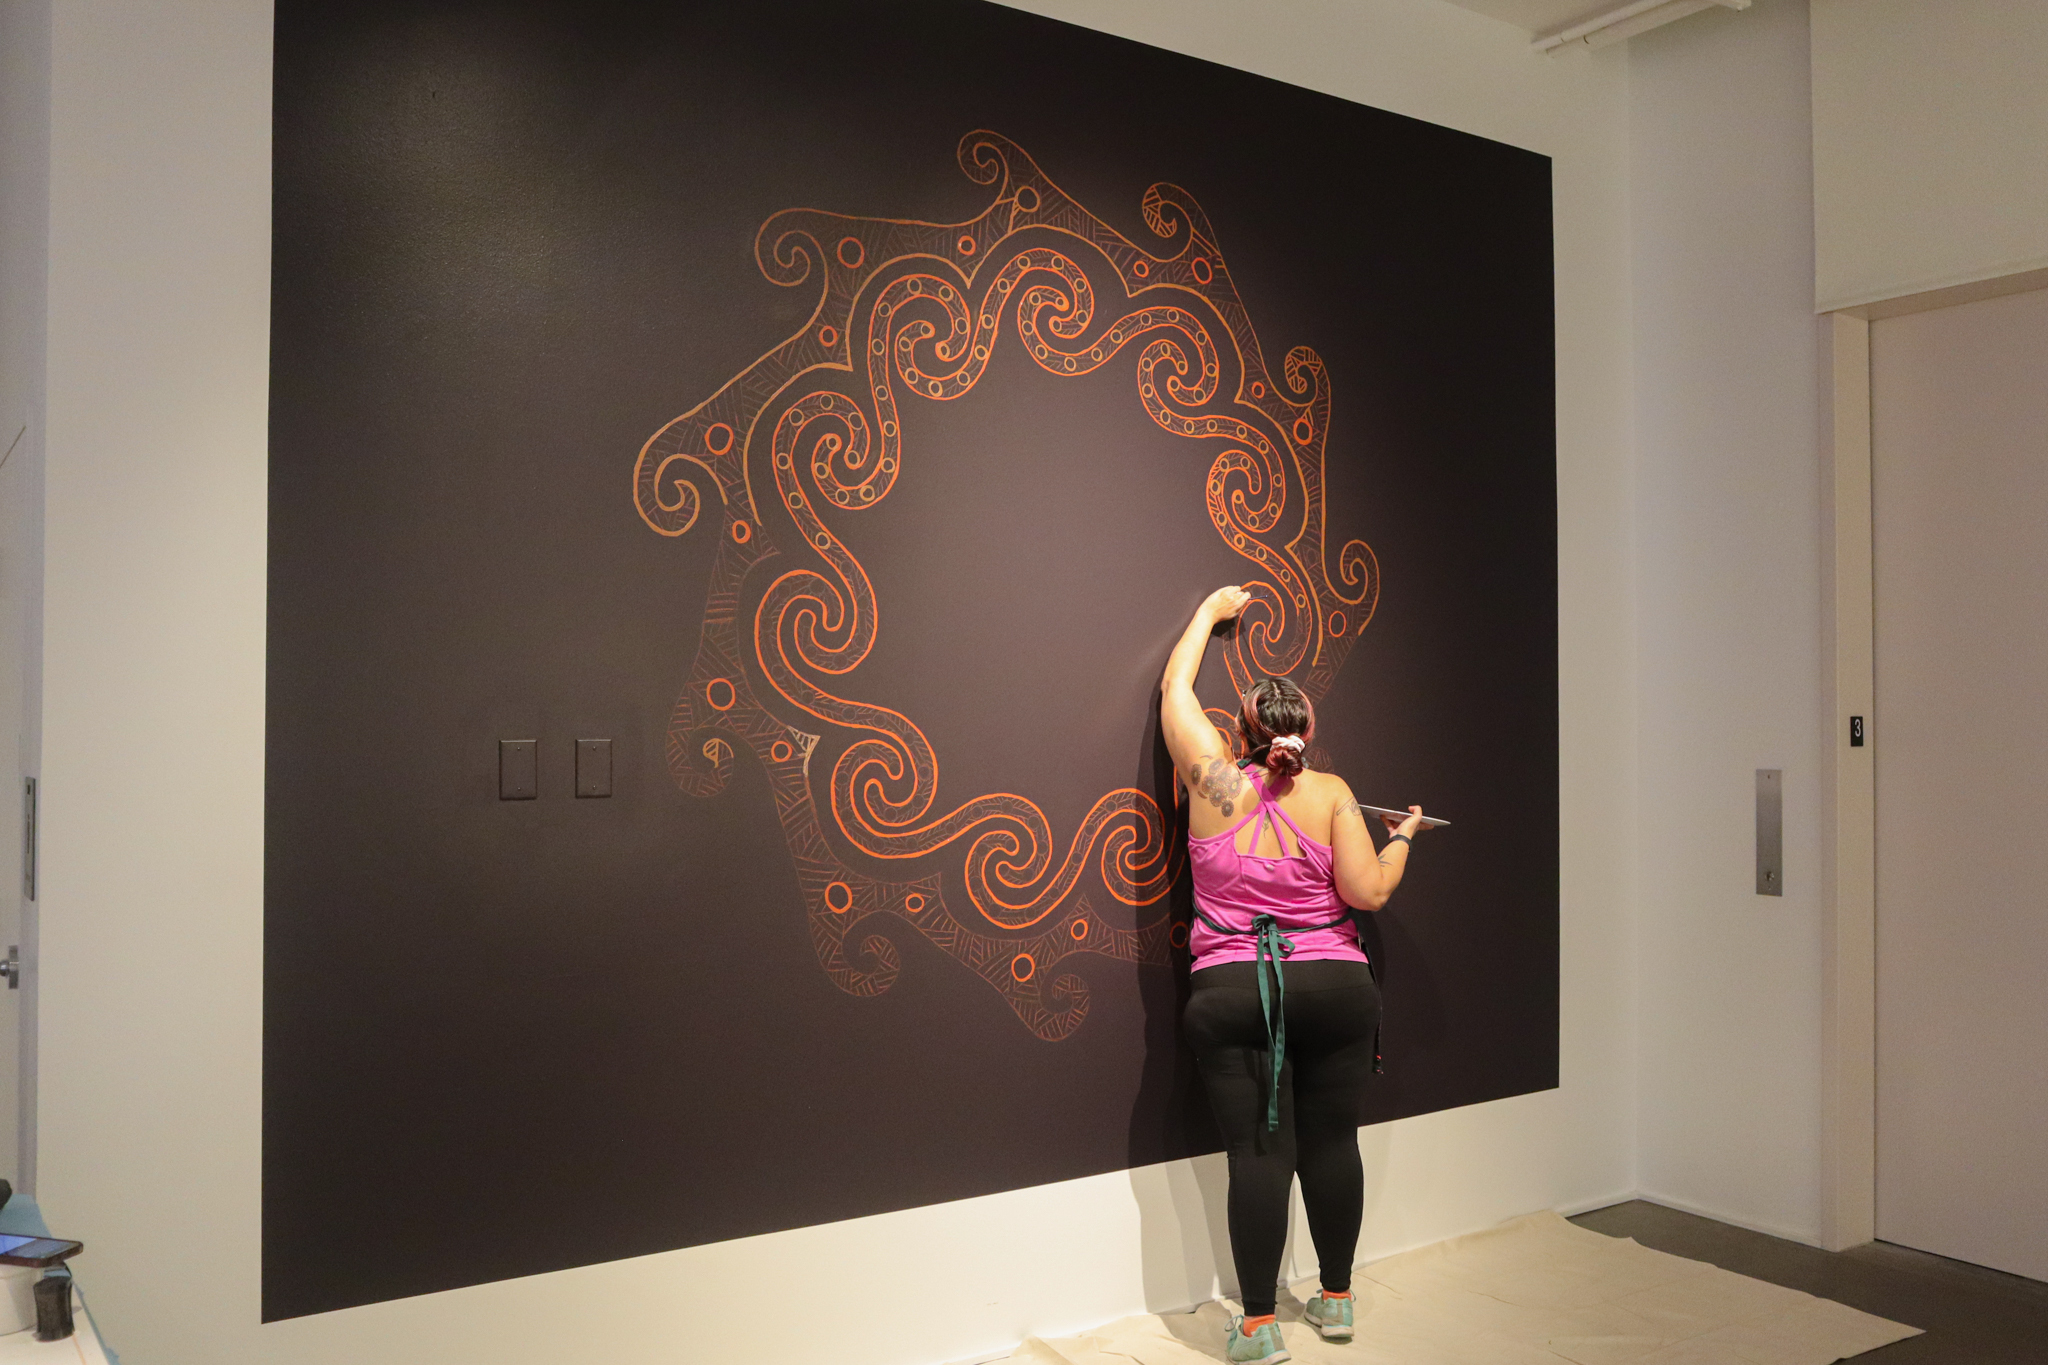 A person is painting on a large black sqaure painted on a white wall. The person has a pink top and black leggings on with dark hair pulled back. They are painting a swirling star-like pattern in deep reds and oranges.